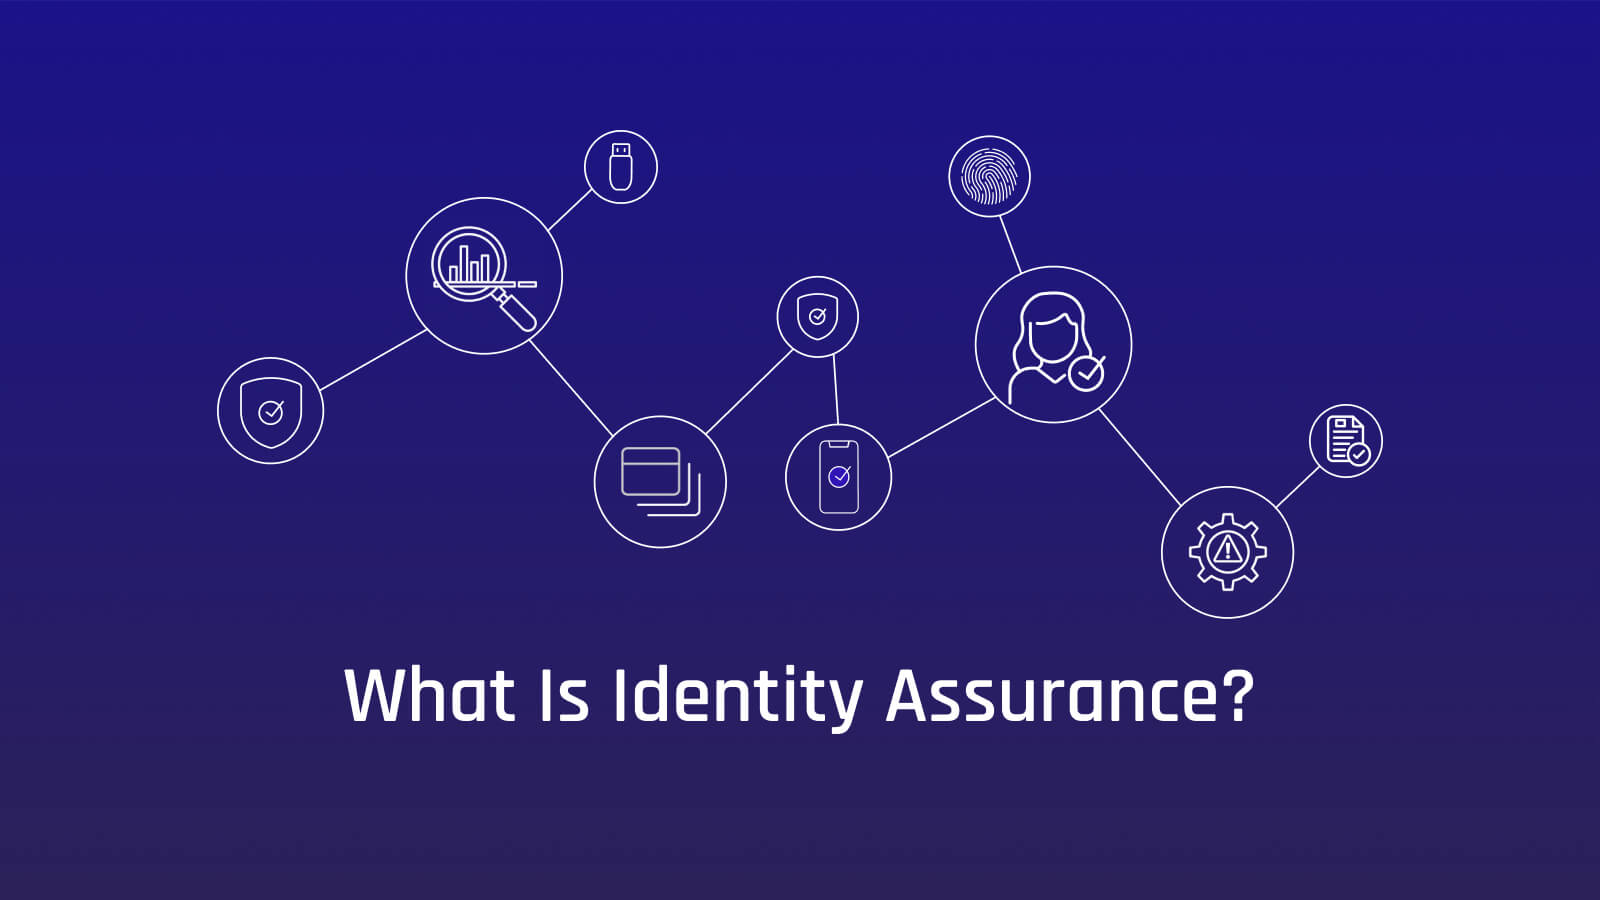 What Is Identity Assurance and Why Is It Needed